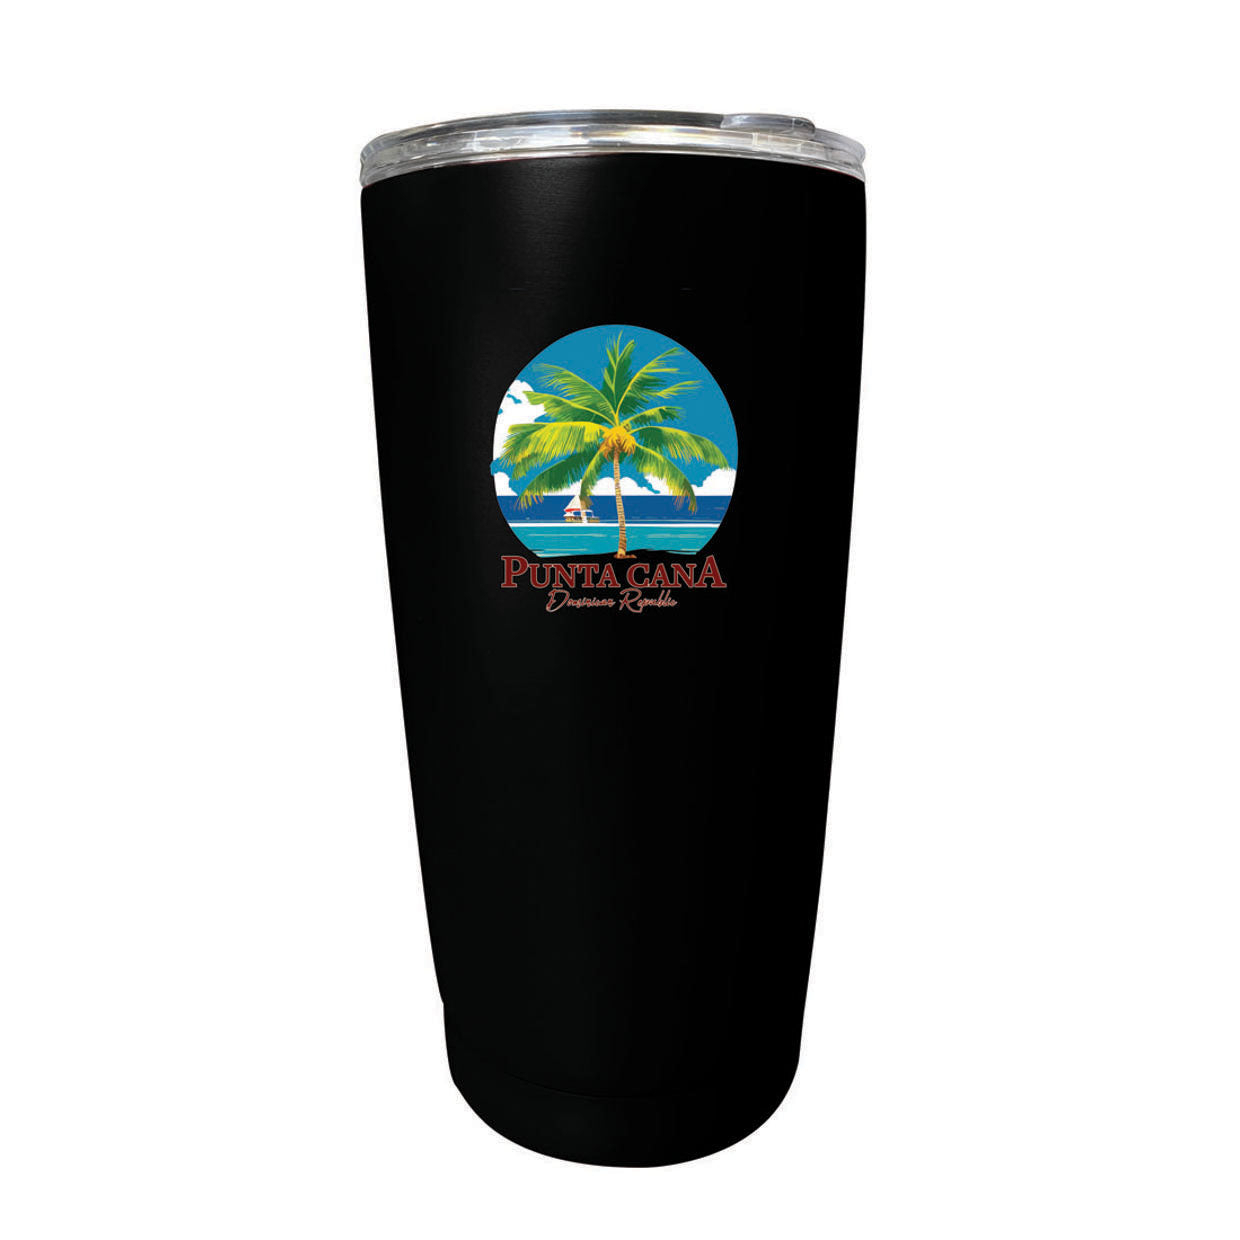 Punta Cana Dominican Republic Souvenir 16 Oz Stainless Steel Insulated Tumbler - Navy, PARROT